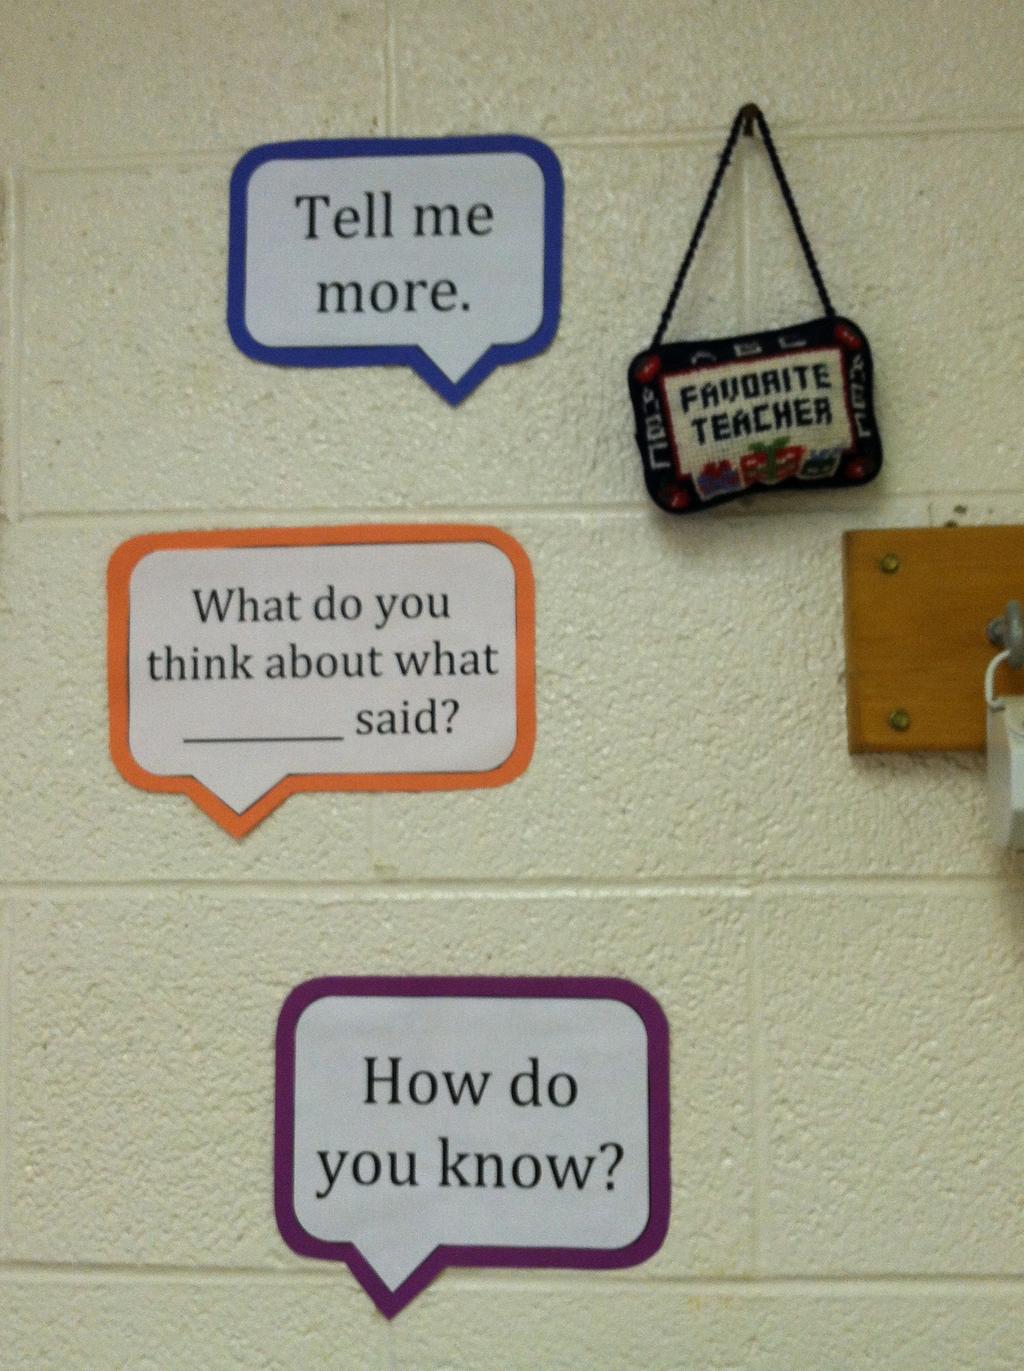 8/6/13 Building a classroom culture Step 2: Help students clarify and share their own thoughts Provide classroom supports to help students express their